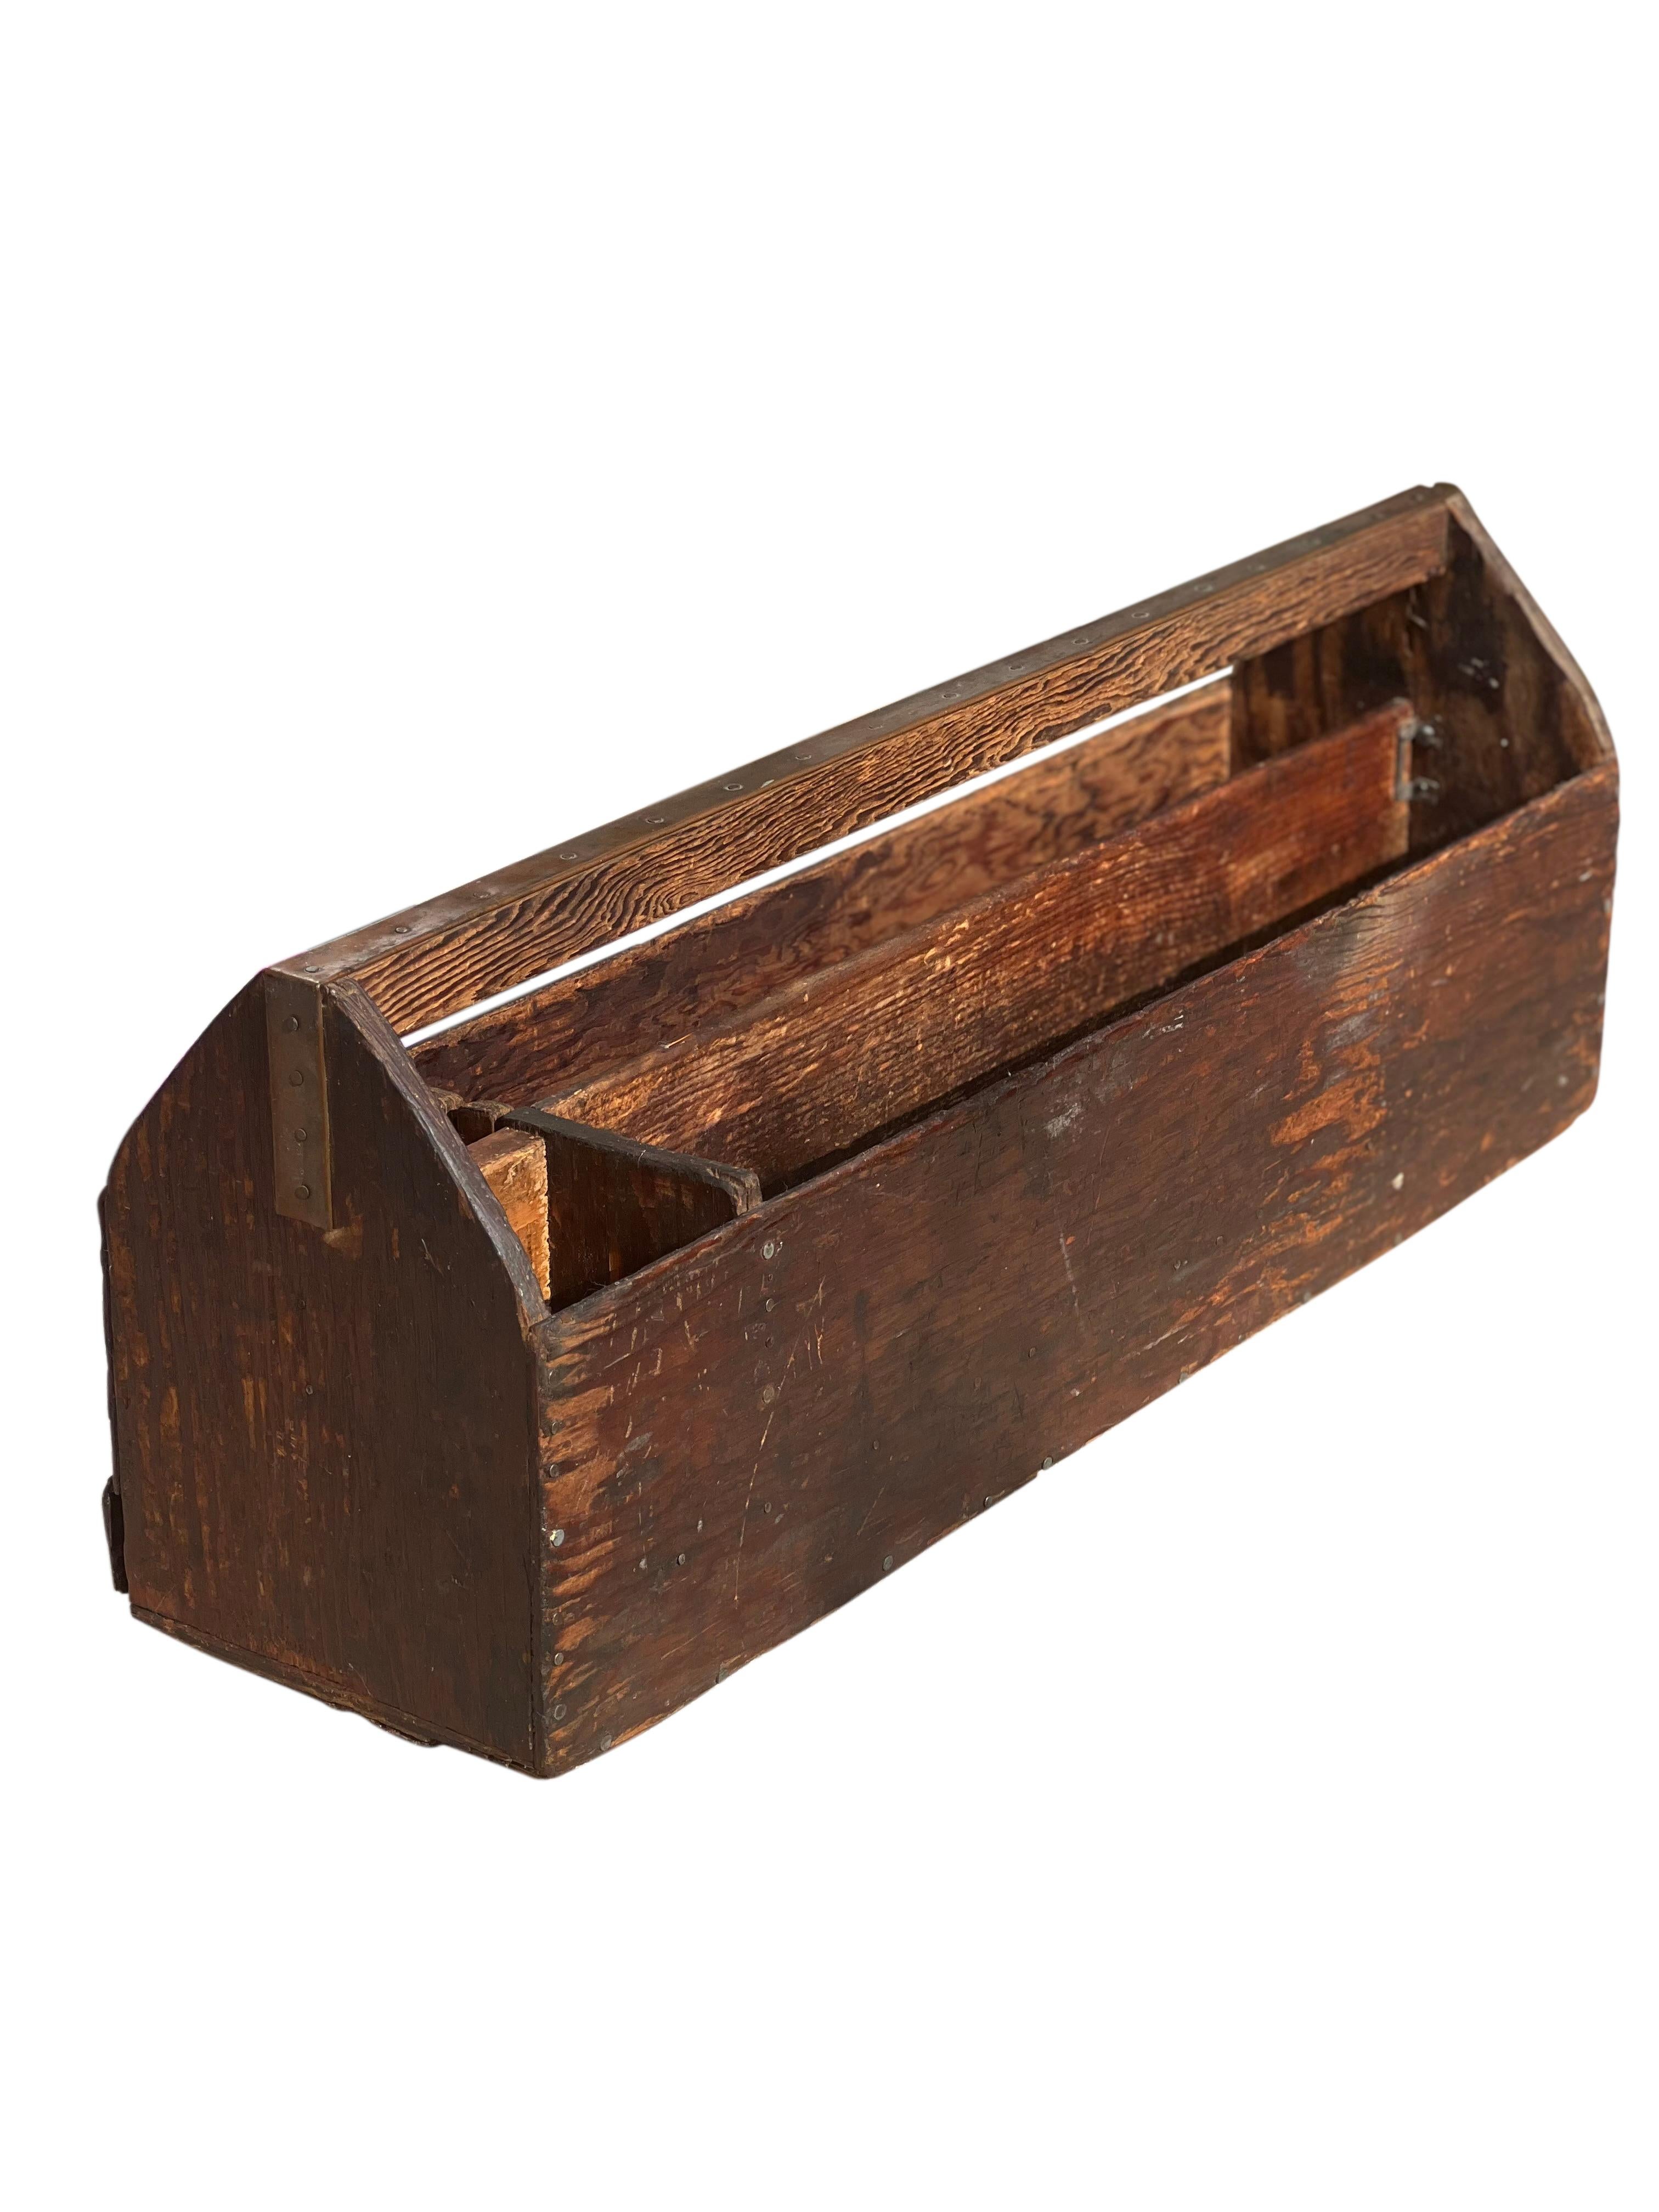 Antique Handcrafted Primitive Pine Tool Carrier or All-Purpose Caddy with Drawer In Good Condition For Sale In Doylestown, PA